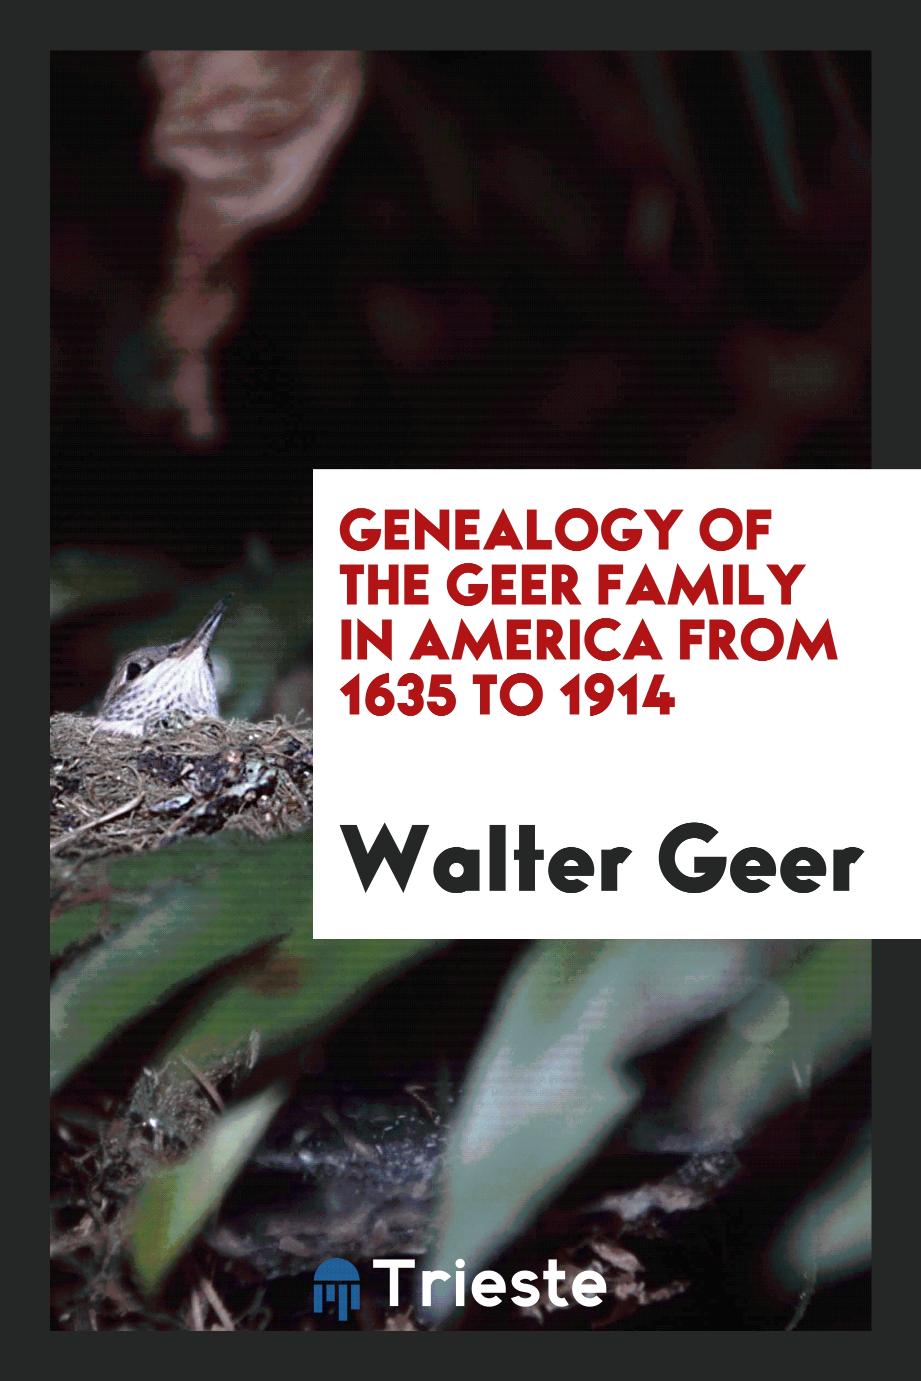 Genealogy of the Geer Family in America from 1635 to 1914